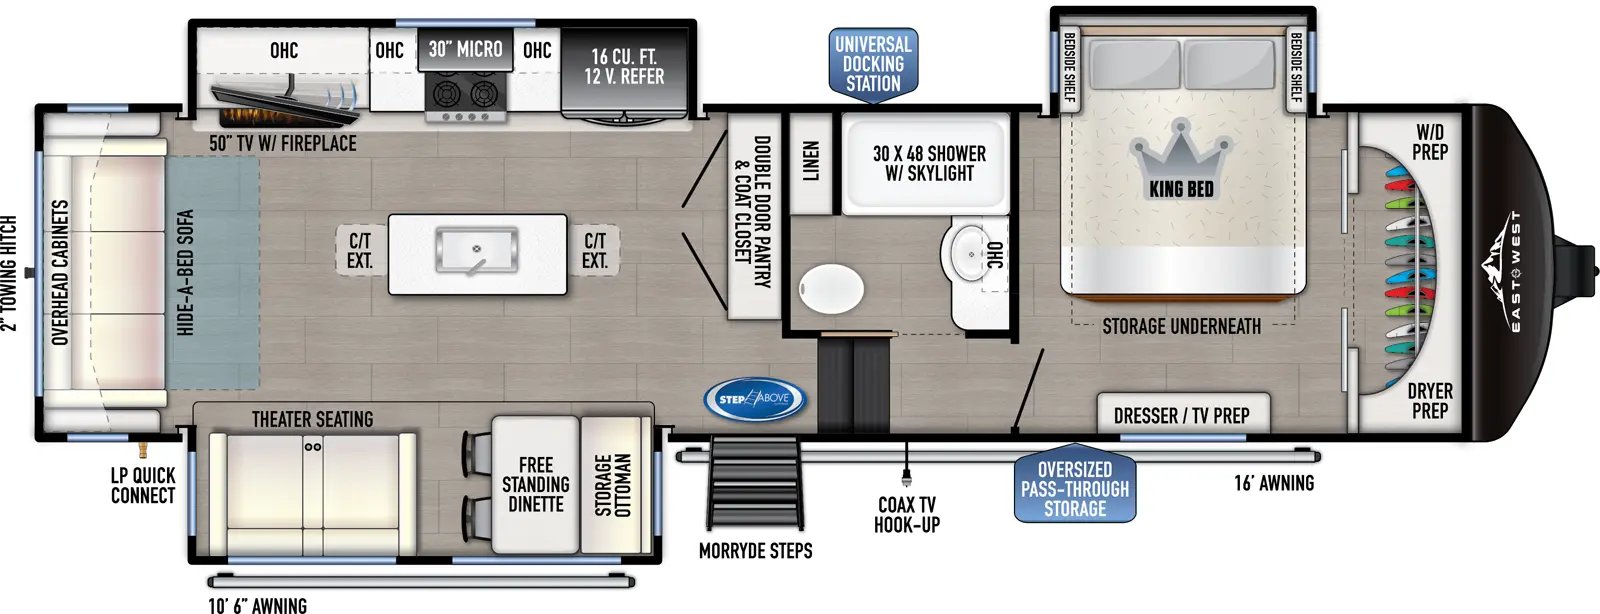 The 3100RL has 3 slideouts and one entry. Exterior features an oversized pass through storage, universal docking station, MORryde steps, coax TV hookup, 10 foot 6 inch awning and 16 foot awning, LP quick connect, and 2 inch towing hitch. Interior layout front to back: front closet with washer/dryer prep, off-door side king bed slideout with storage underneath, and door side dresser with TV prep; off-door side full bathroom with overhead cabinet, linen closet, and shower with skylight; steps down to main living area and entry; double door pantry and coat closet along inner wall; off-door side slideout with 12V refrigerator, overhead cabinet, microwave, cooktop, and TV with fireplace; kitchen island with sink and extensions; door side slideout with free-standing dinette with storage ottoman, and theater seating; rear hide-a-bed sofa and overhead cabinet.